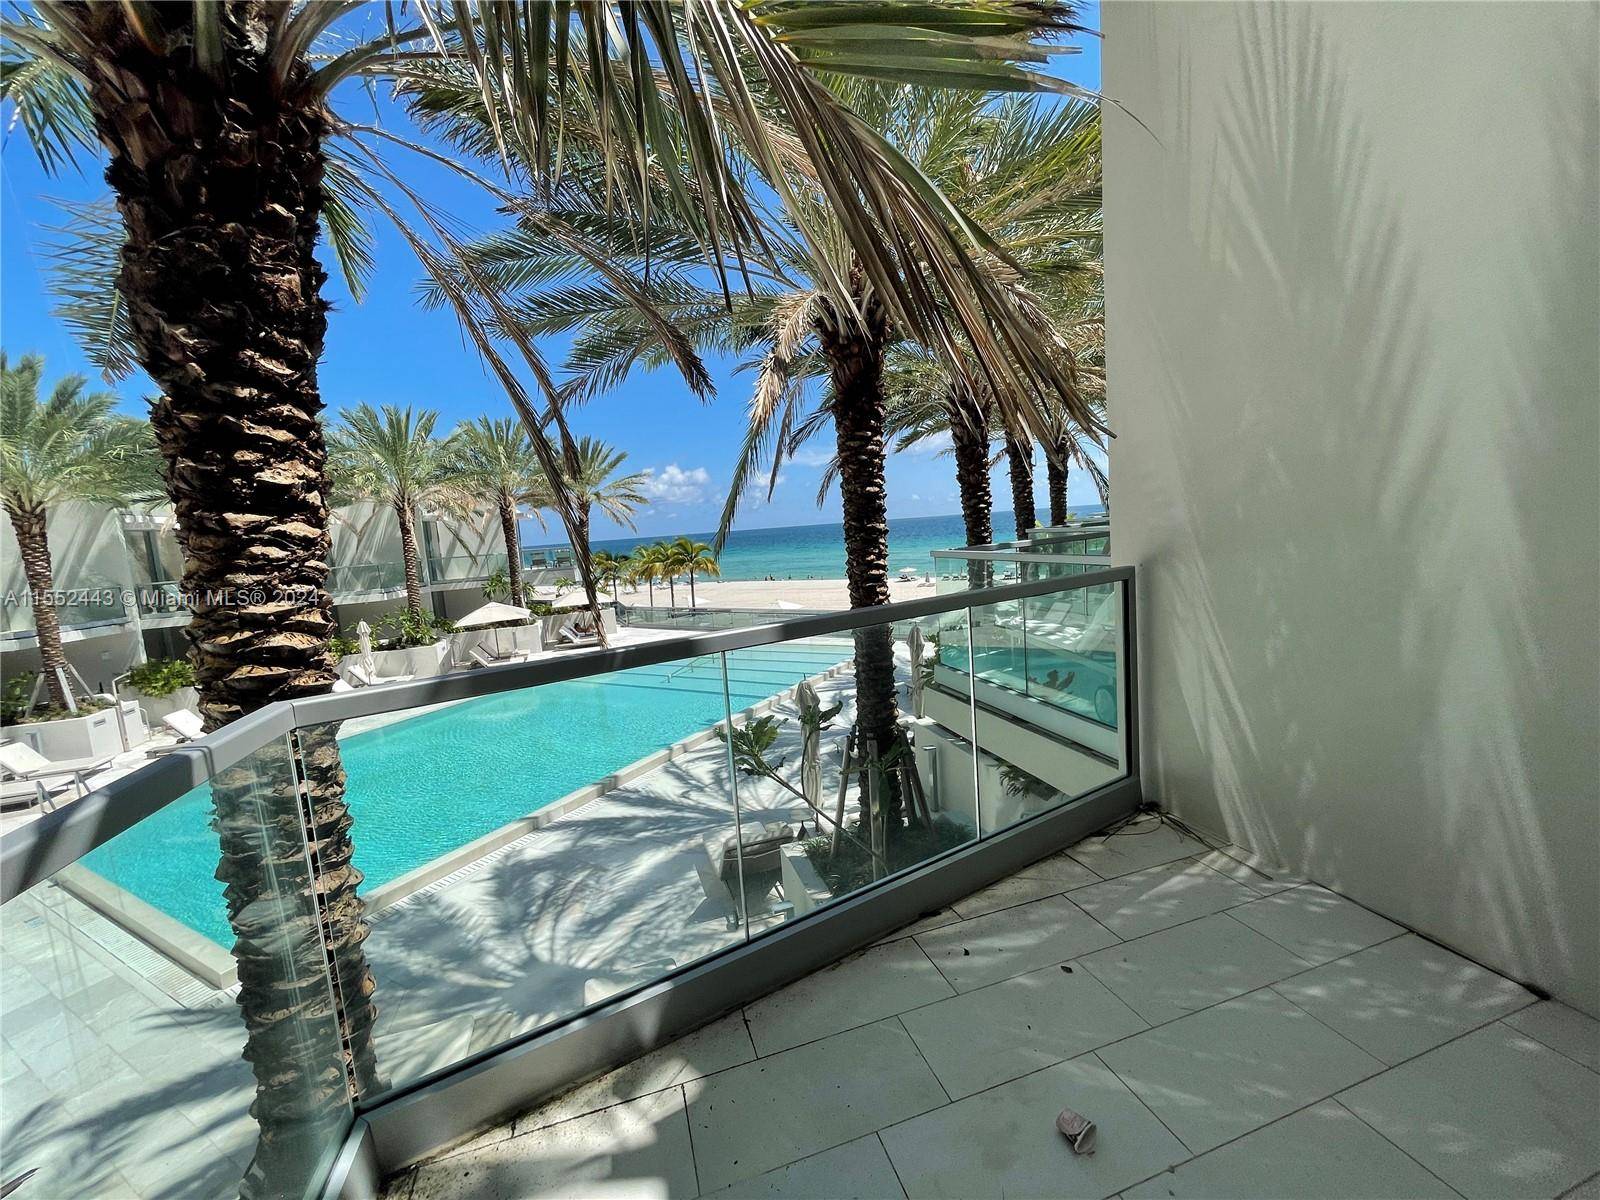 Step into a secluded retreat by owning a cabana an extension of your residence.